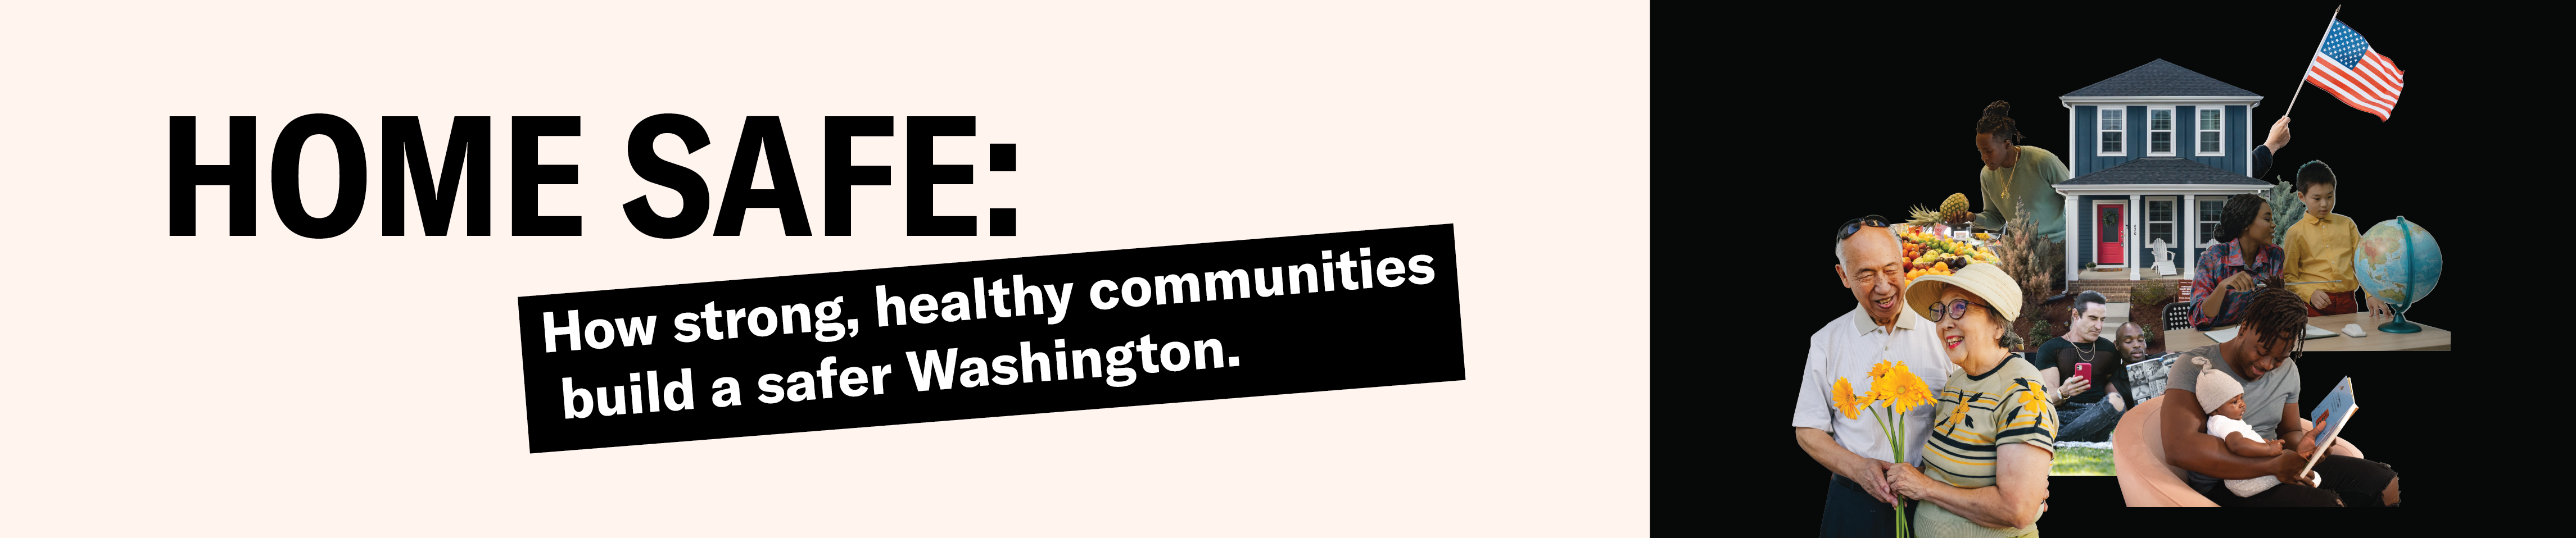 Home Safe: How strong, healthy communities build a safer Washington